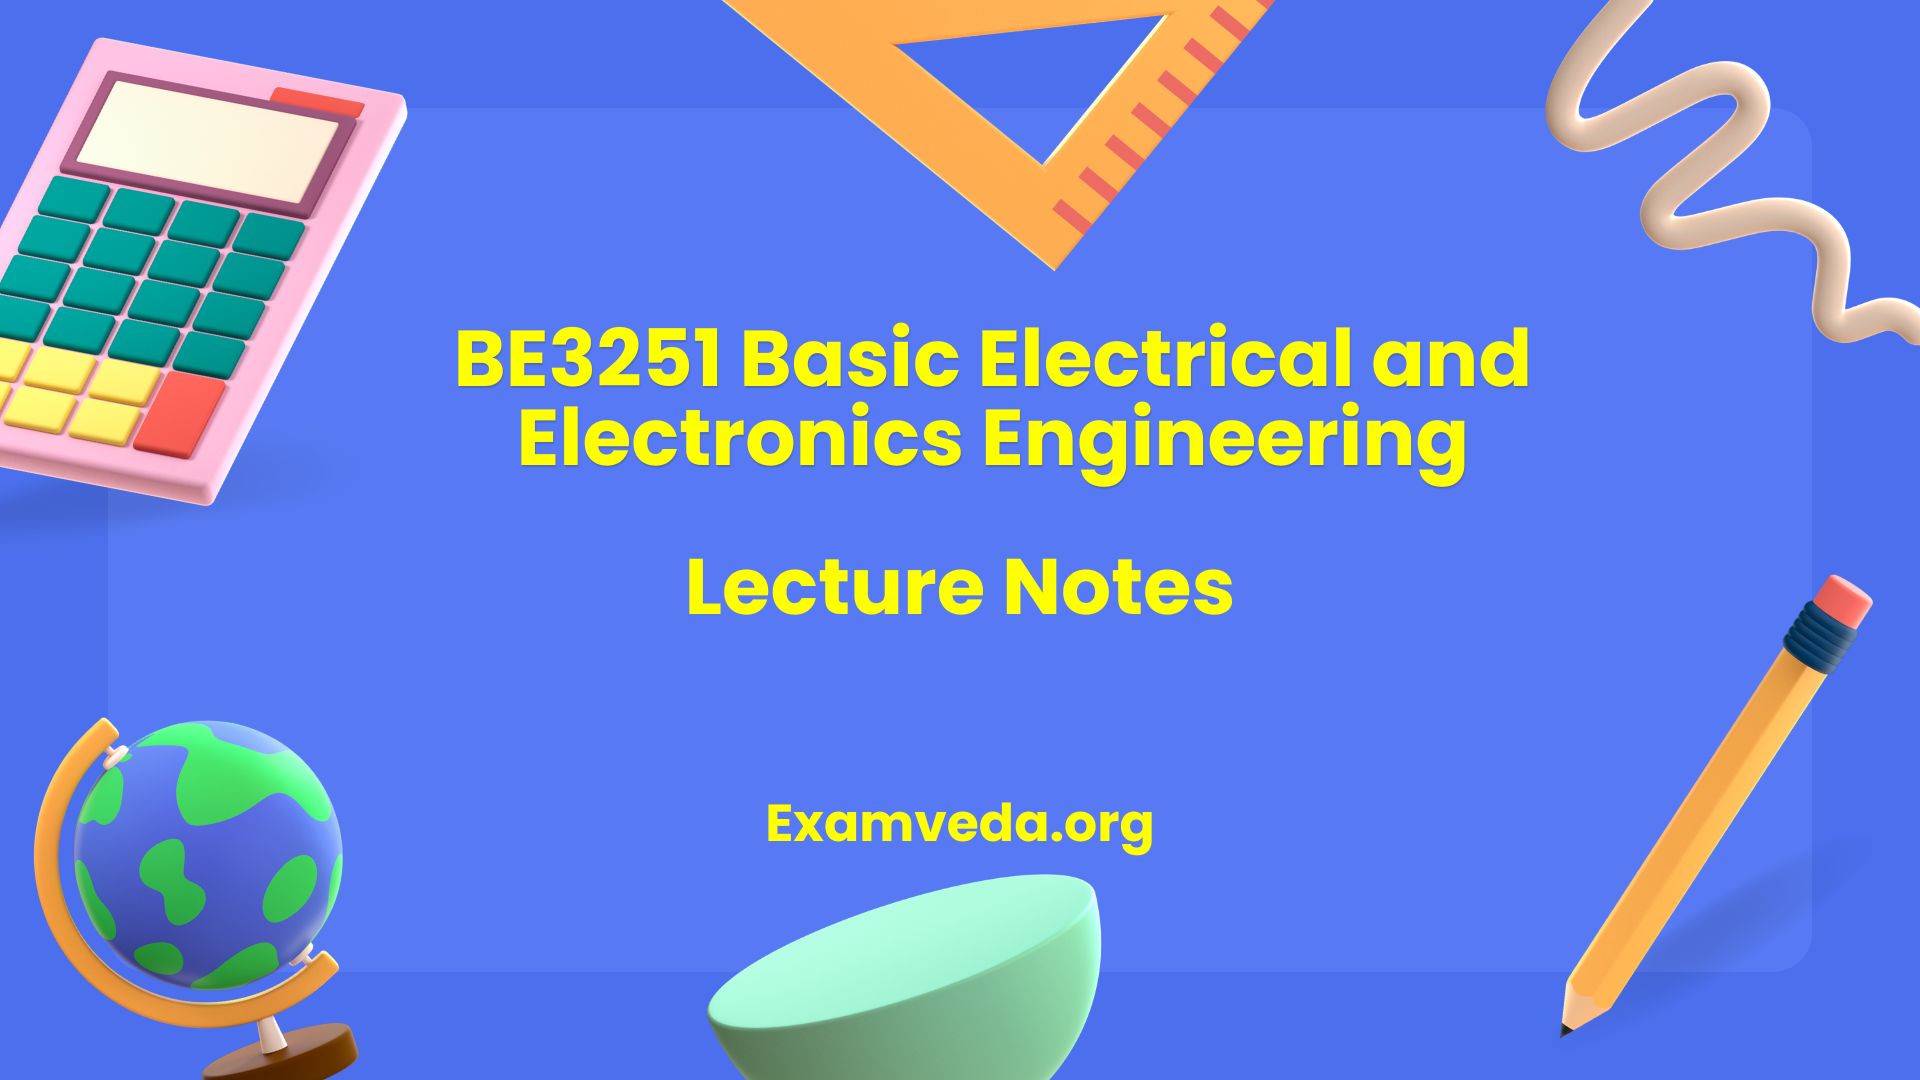 BE3251 Basic Electrical and Electronics Engineering Lecture Notes